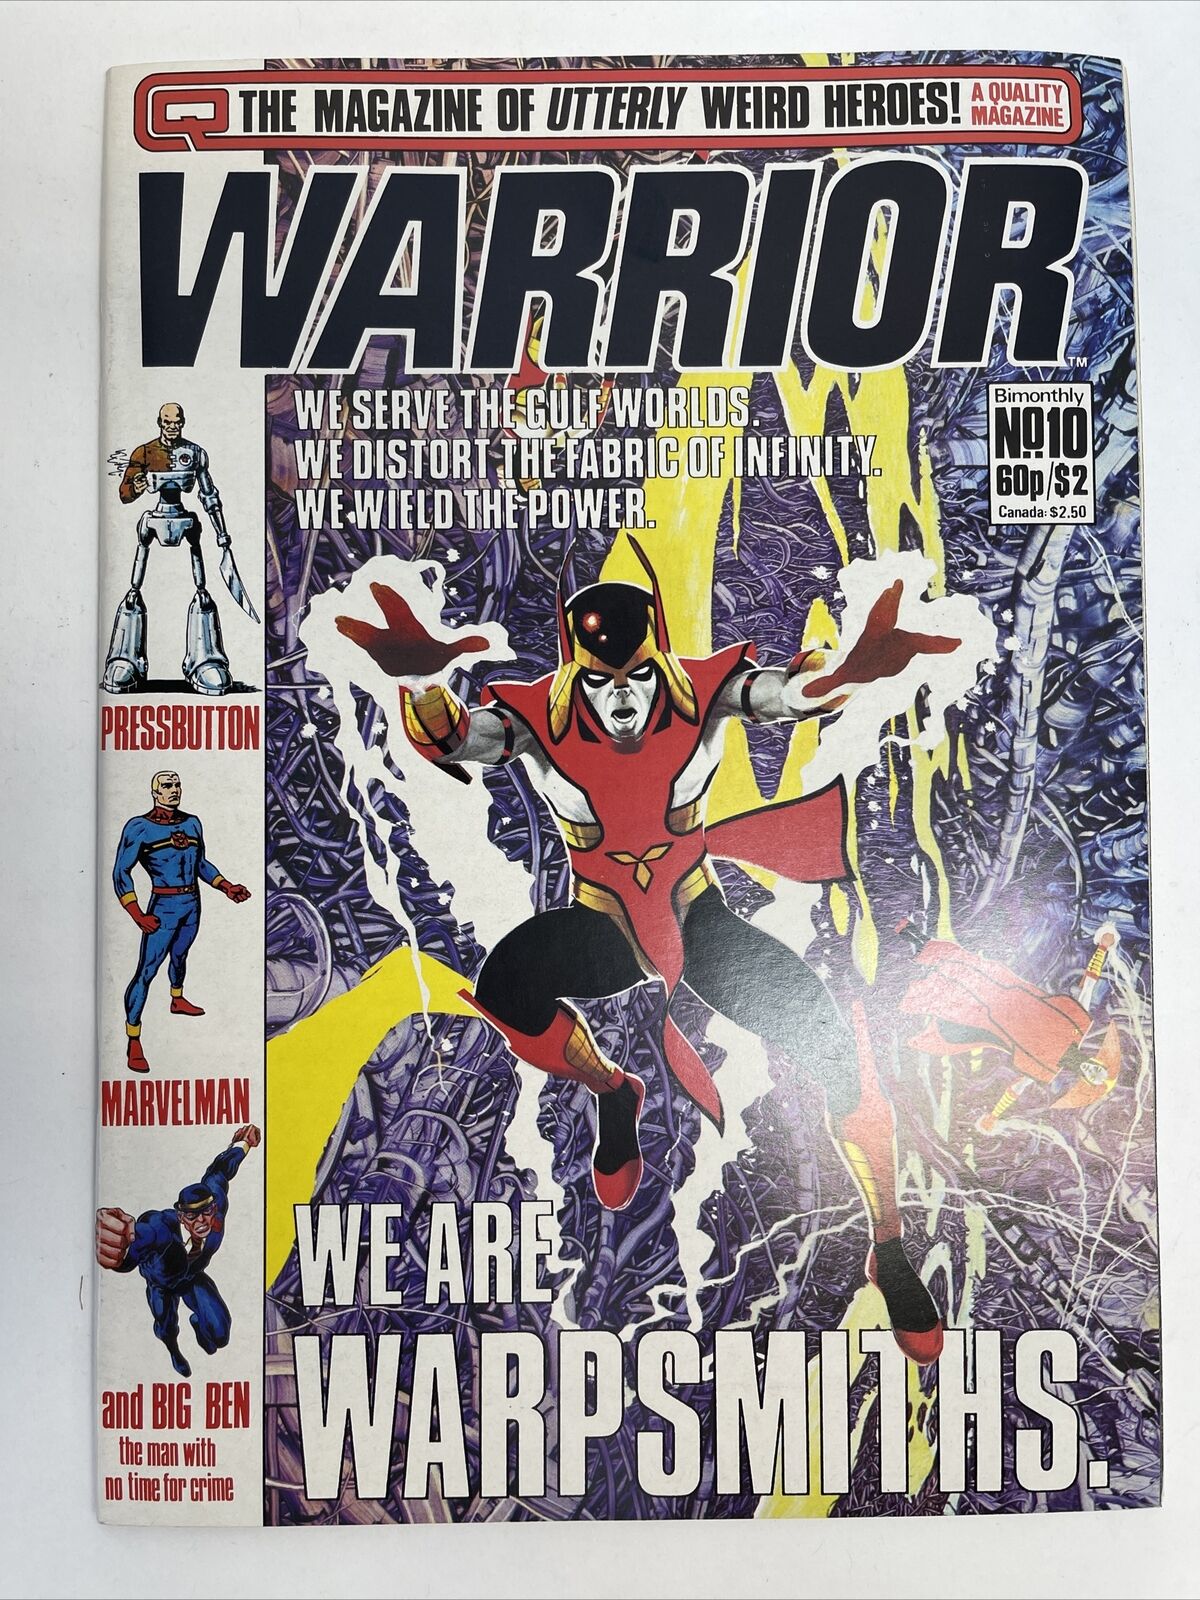 WARRIOR MAGAZINE #10, Apr-May 1983, QUALITY COMMUNICATIONS, UK, EXCELLENT